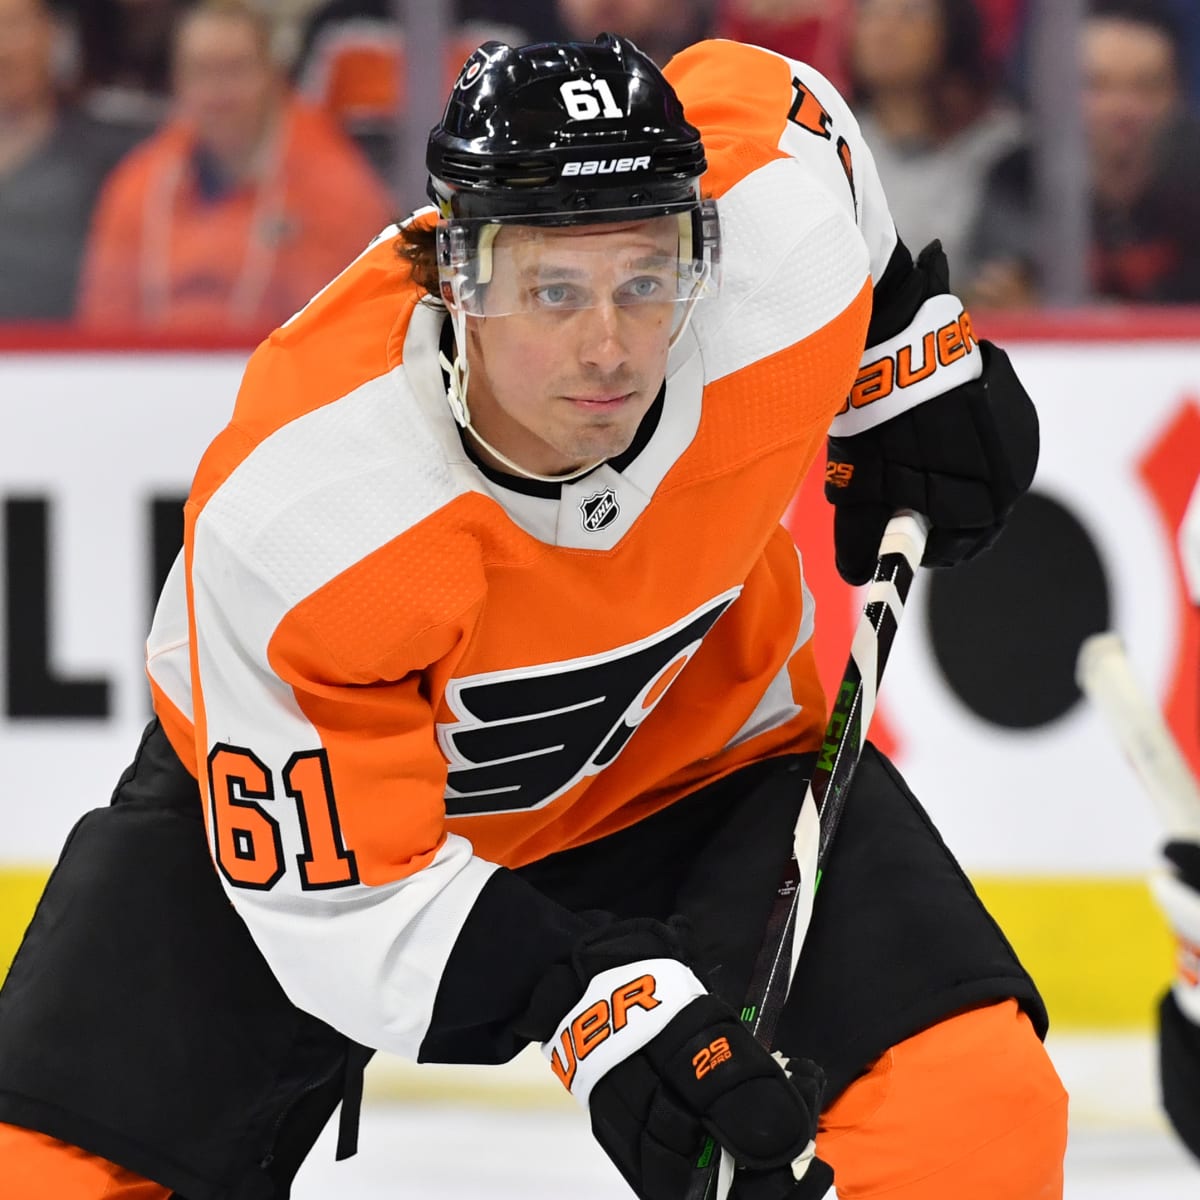 Flyers Thumbs Up, Thumbs Down: Justin Braun lost a step, but ends career  with grace - The Hockey News Philadelphia Flyers News, Analysis and More